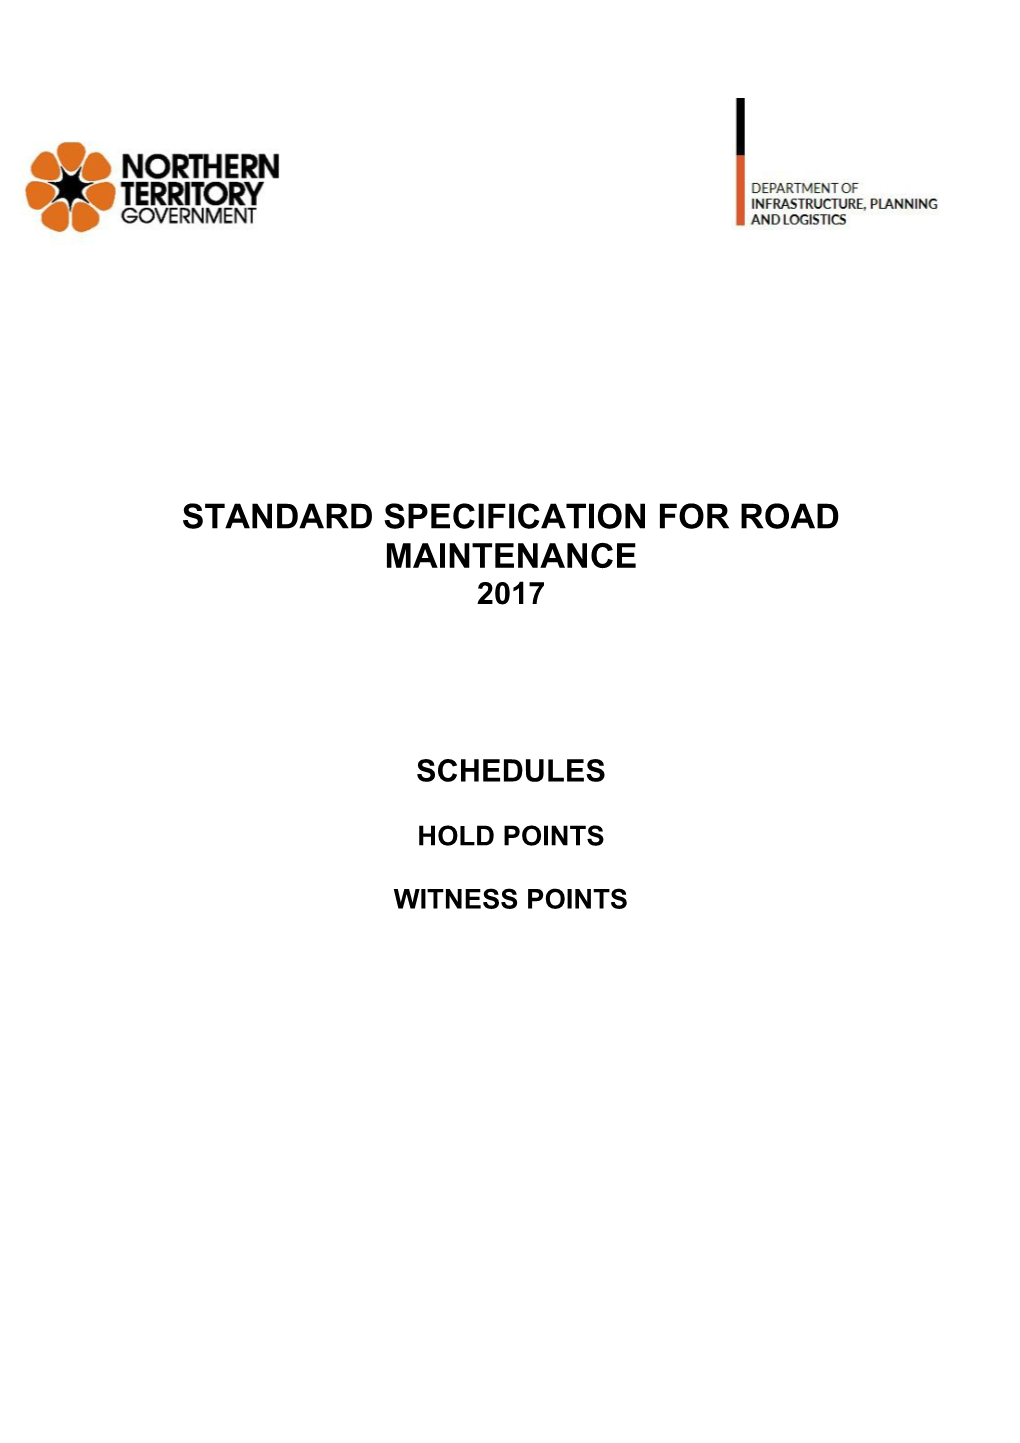 Standard Specification for Road Maintenance